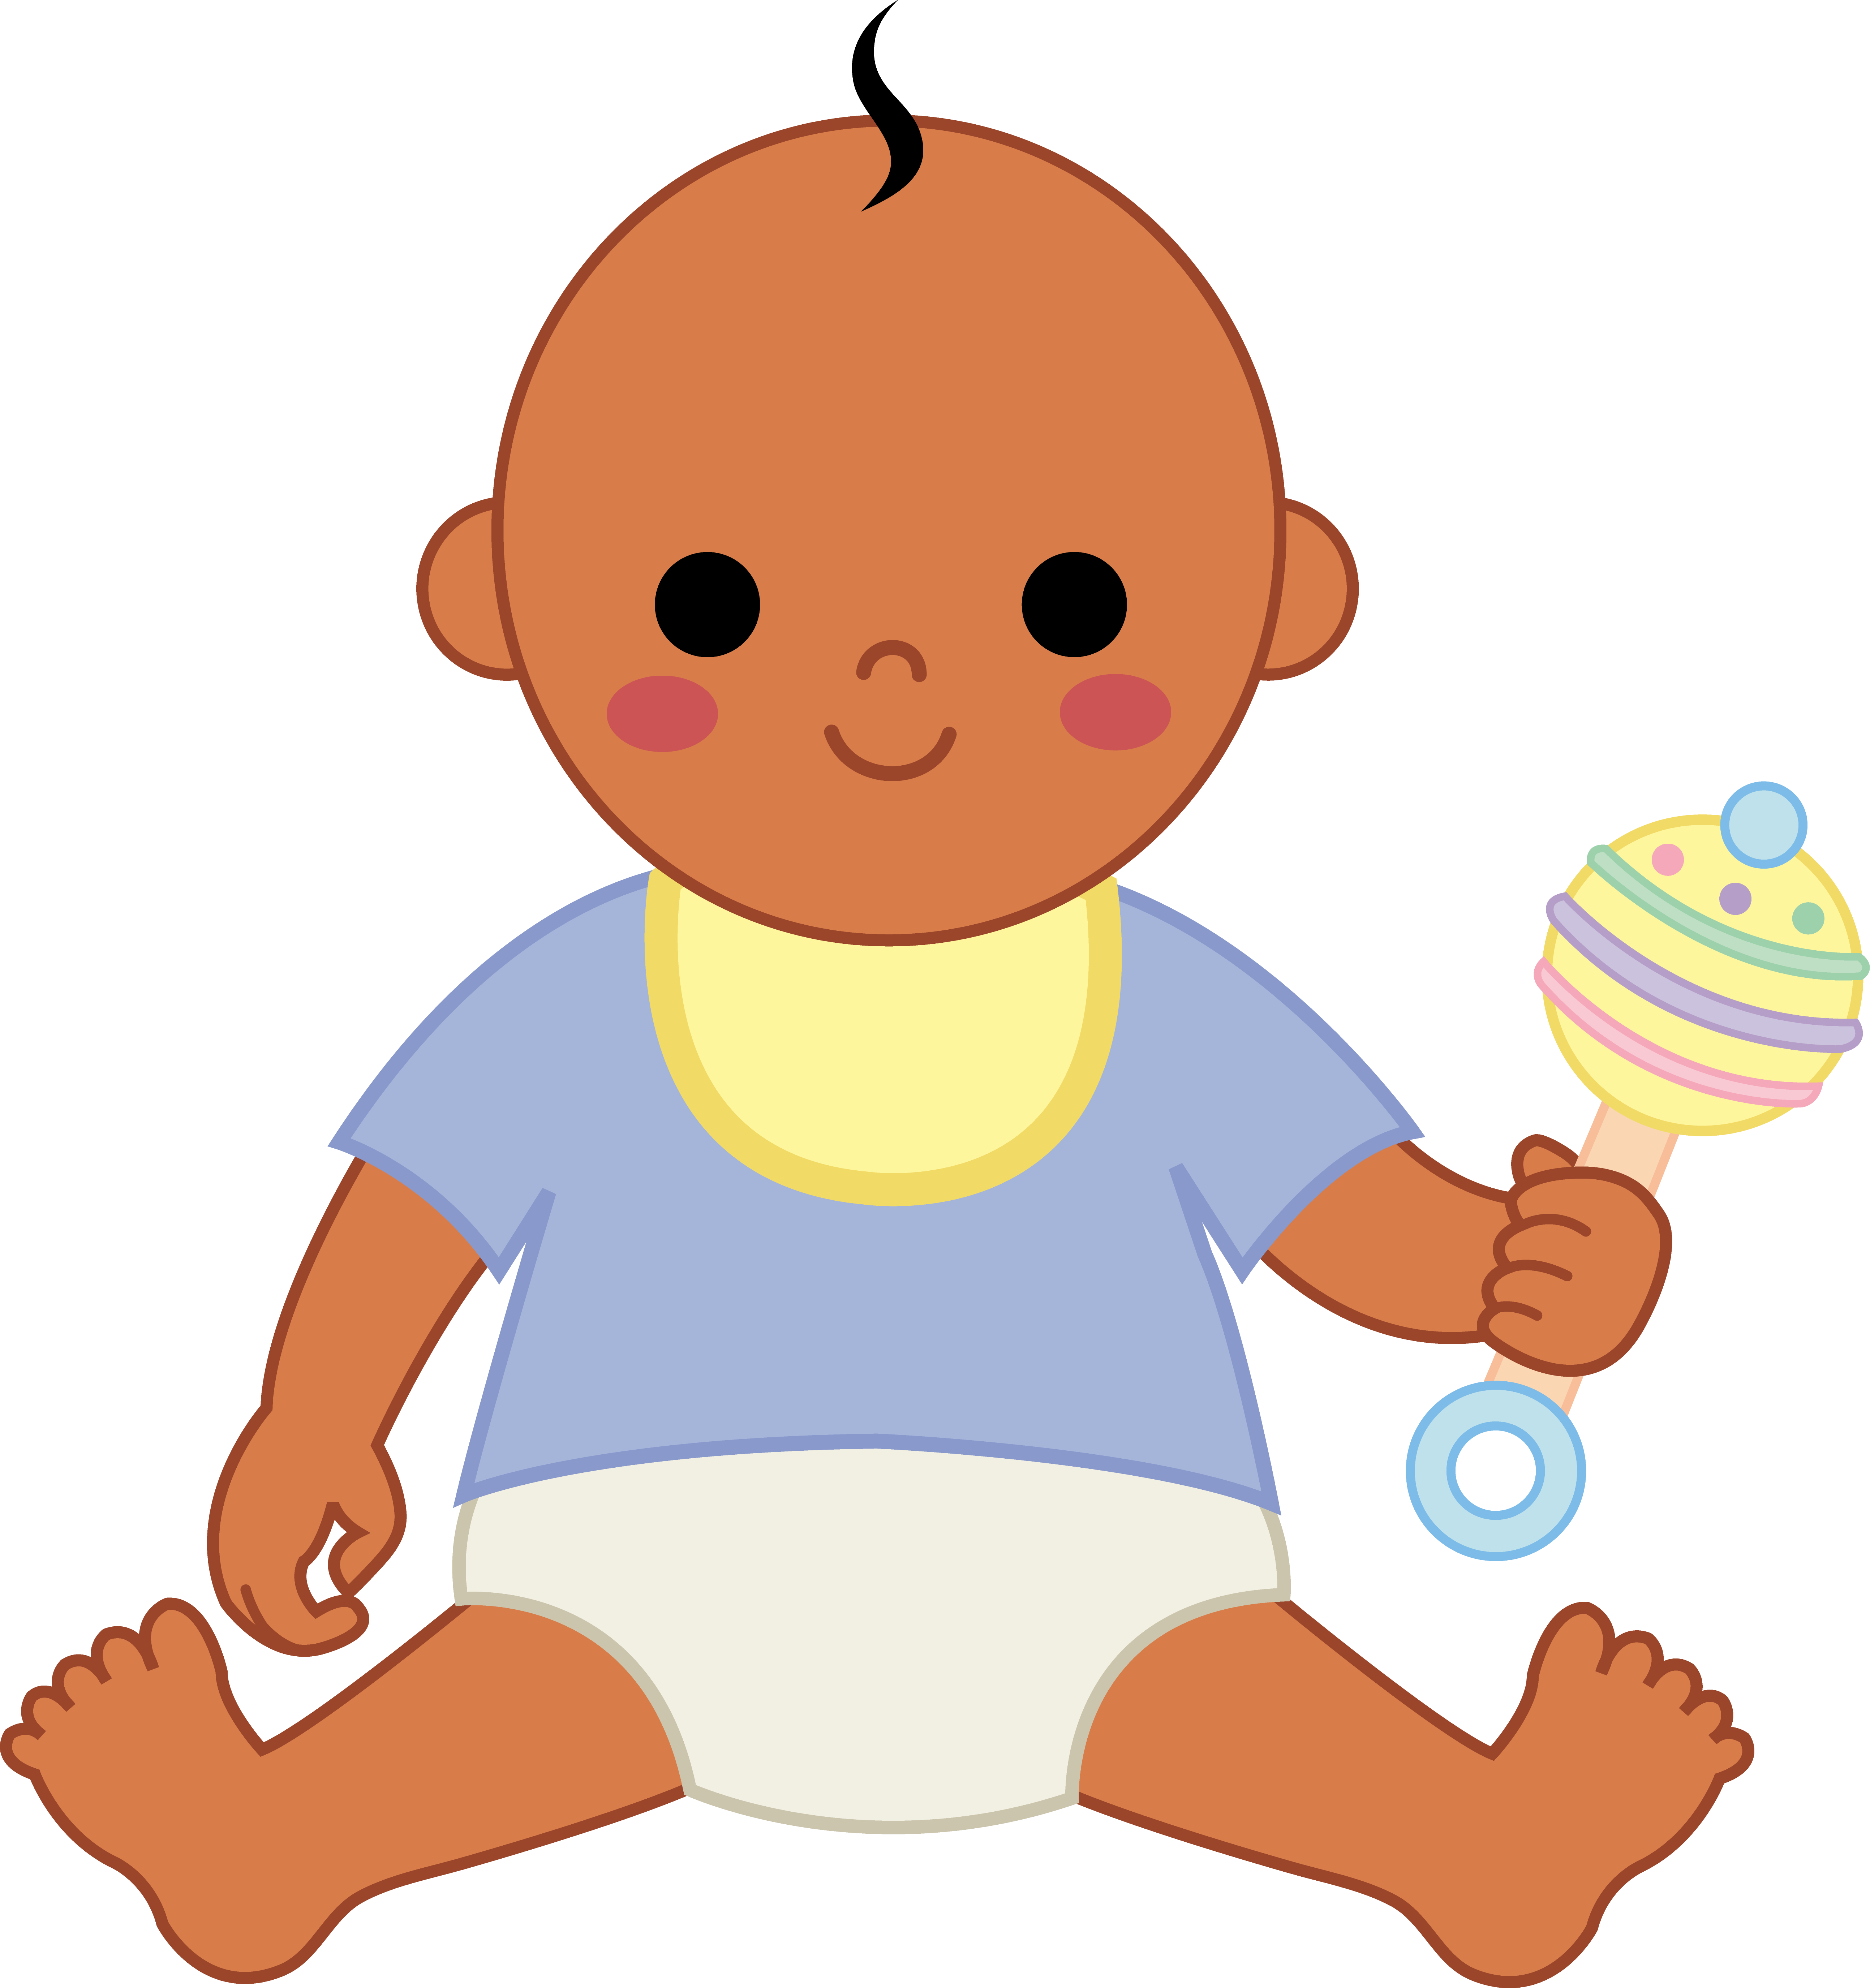 Download PNG image - Little Baby Boy PNG Clipart 